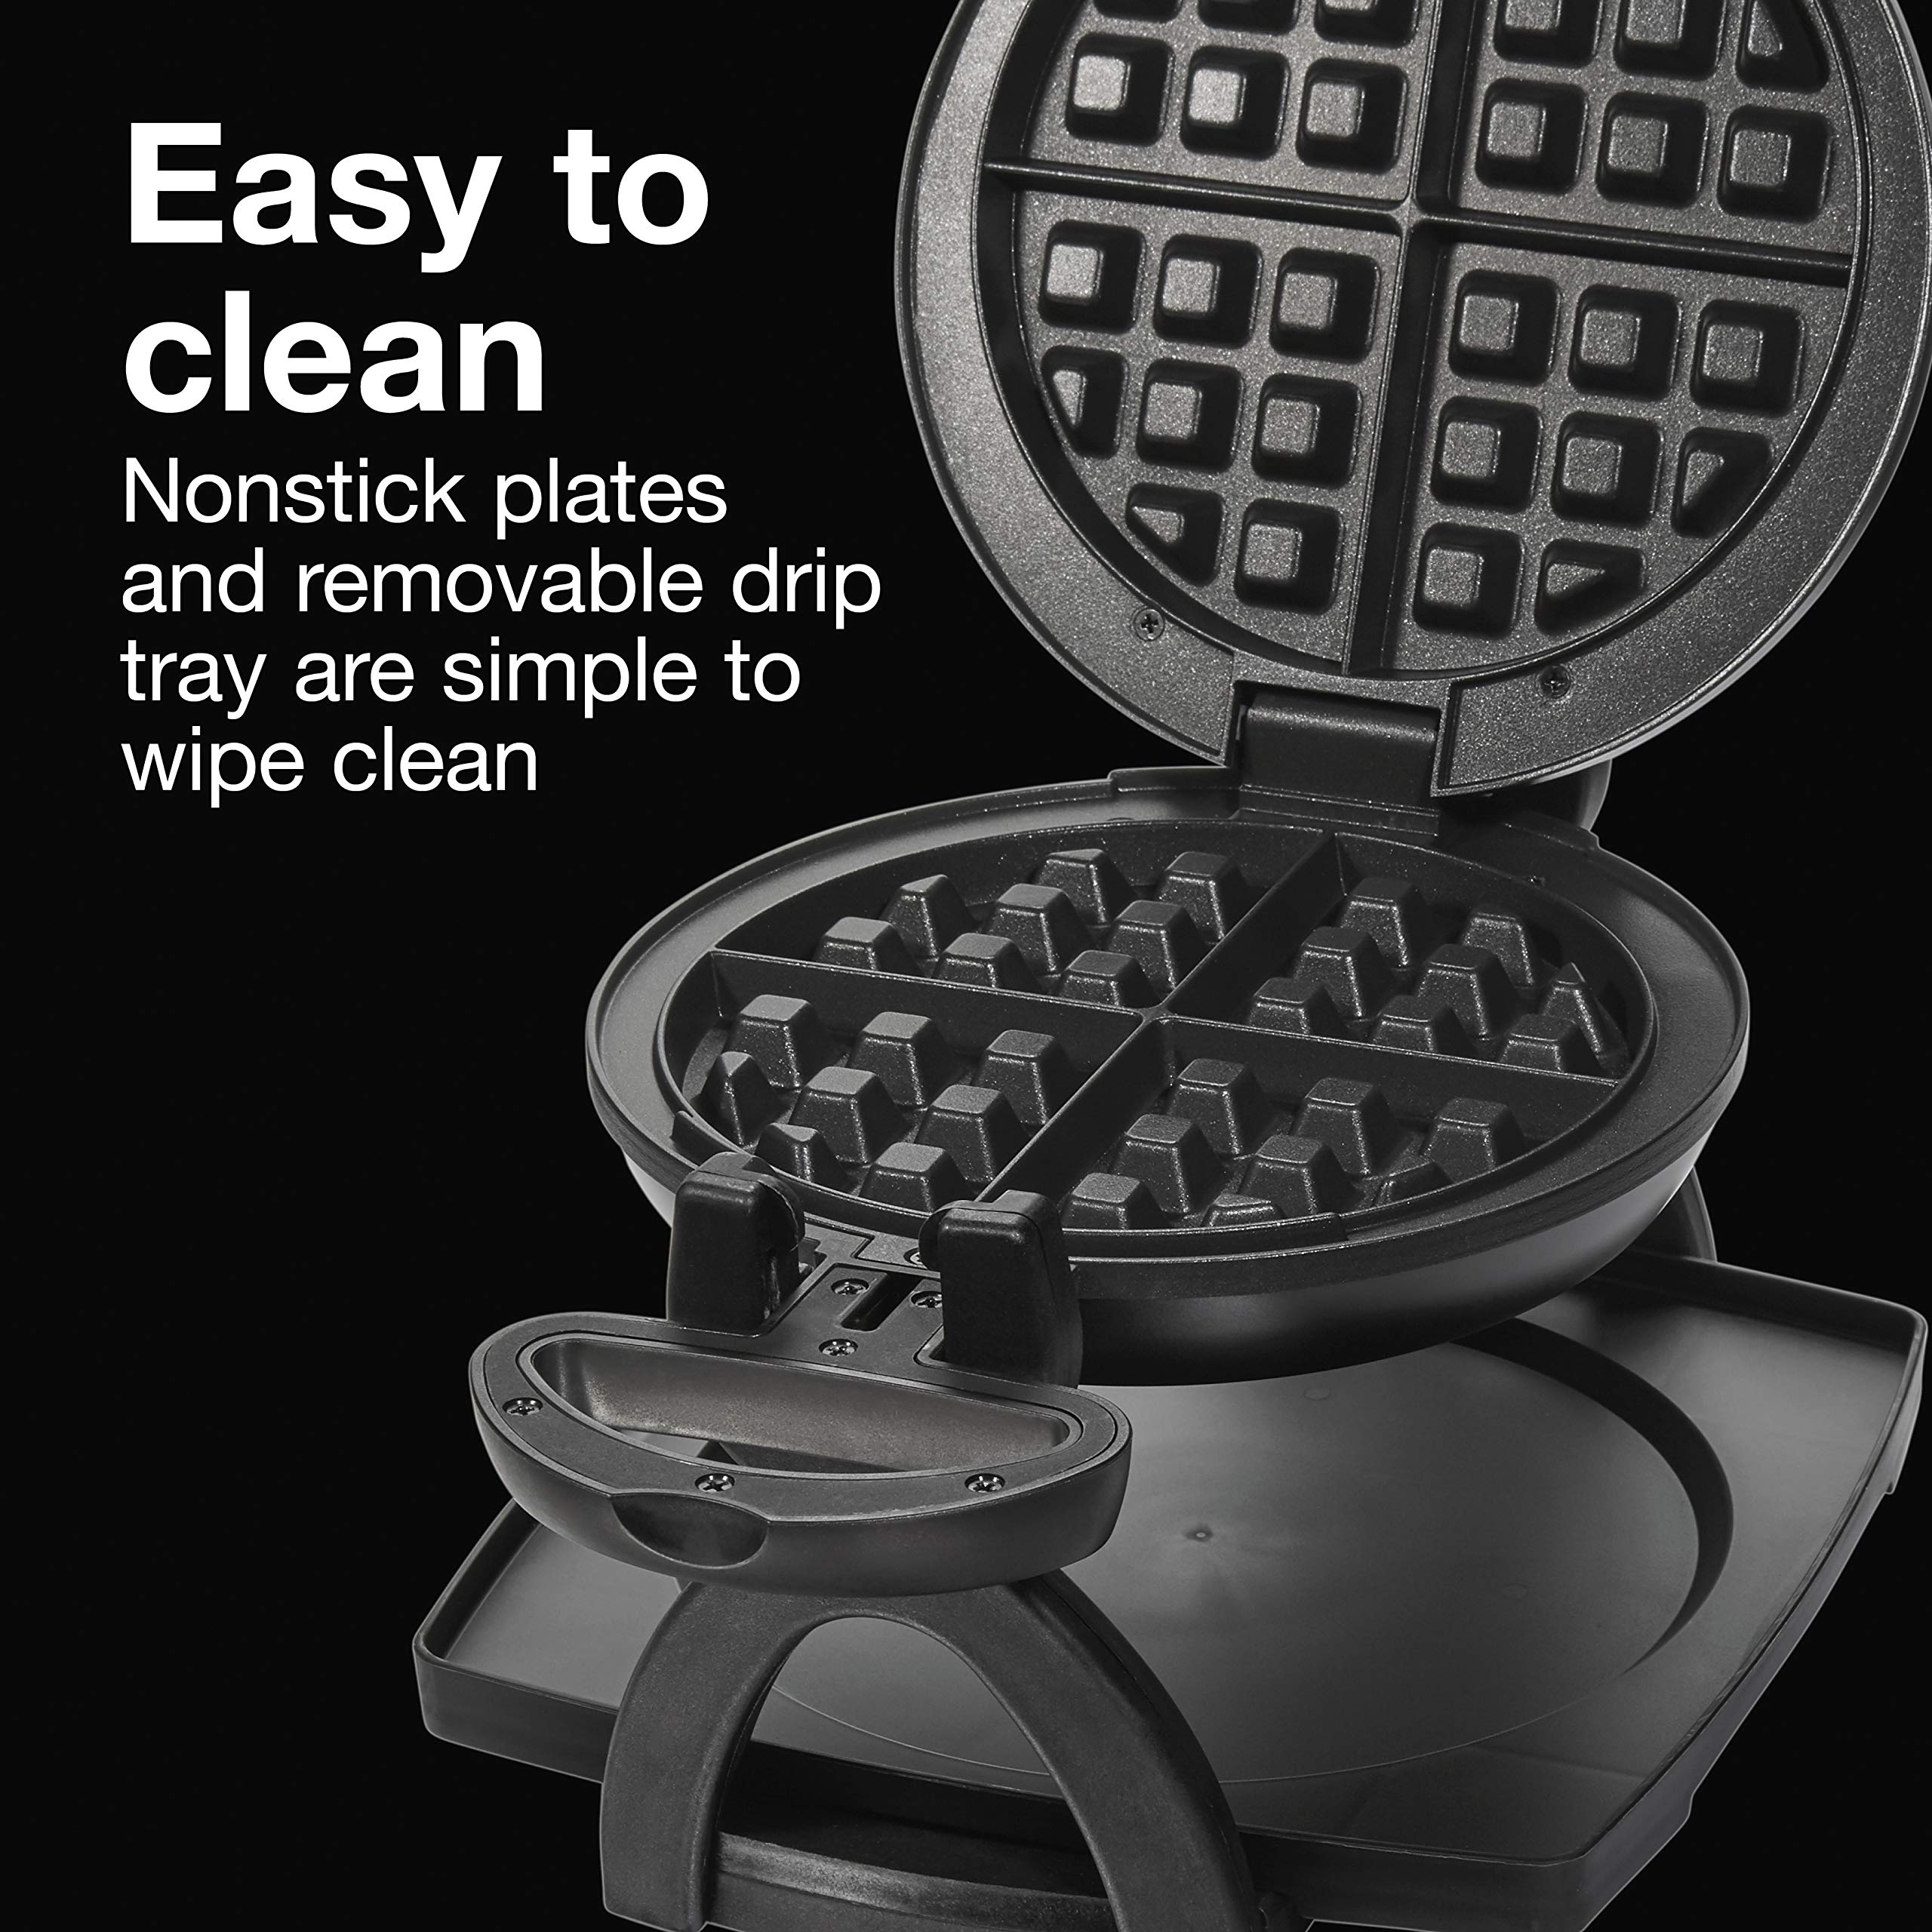 Proctor Silex Belgian Waffle Maker with Nonstick Plates, Single Flip, Cool-Touch Handle and Removable Drip Tray for Easy Cleanup Black (26090PS)